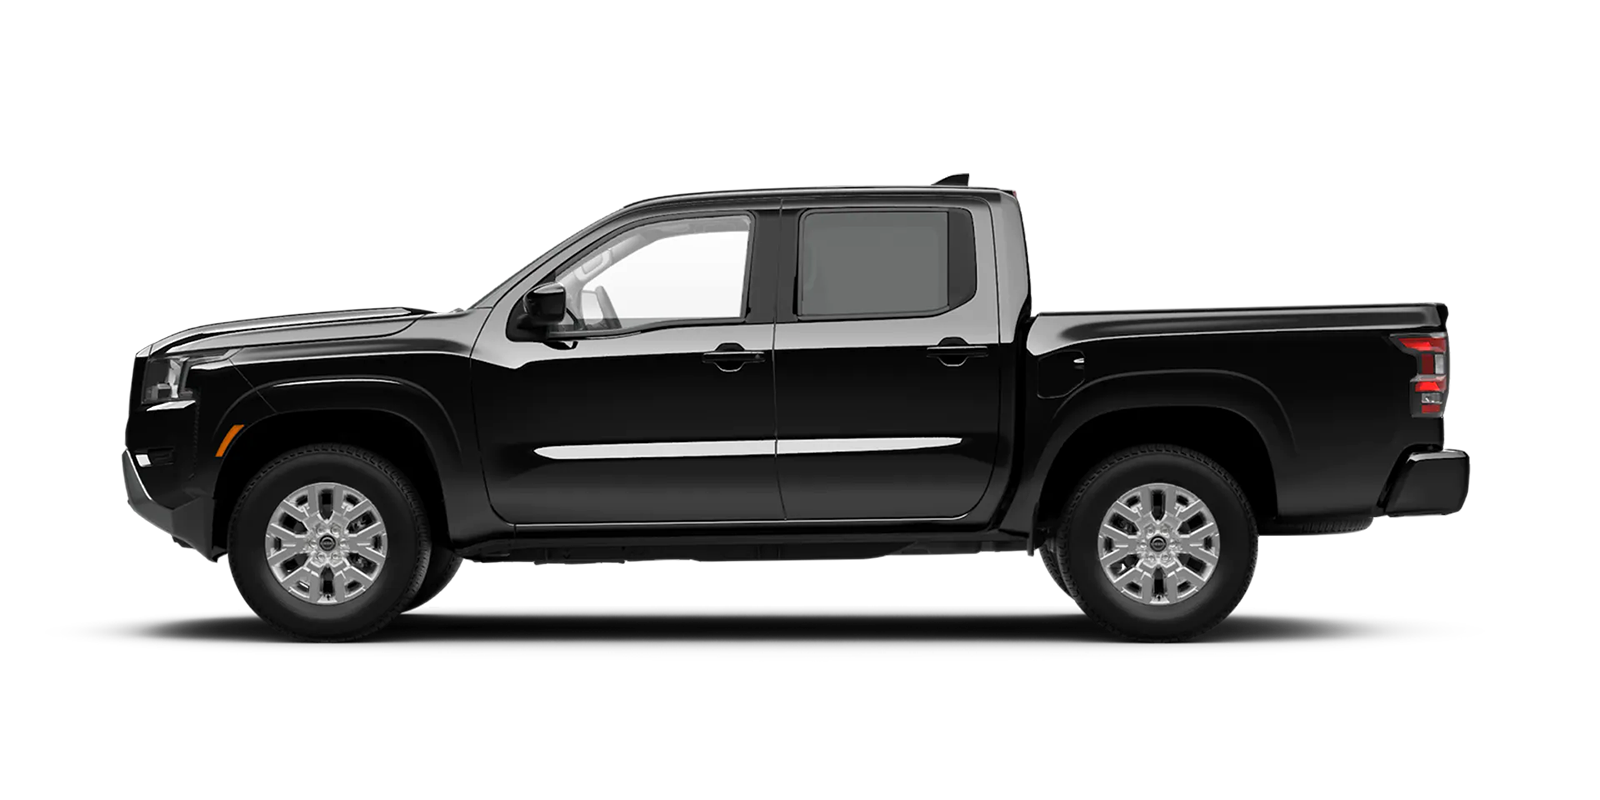 2022 Frontier Crew Cab SV 4x2 in Super Black | Nationwide Nissan in Timonium MD